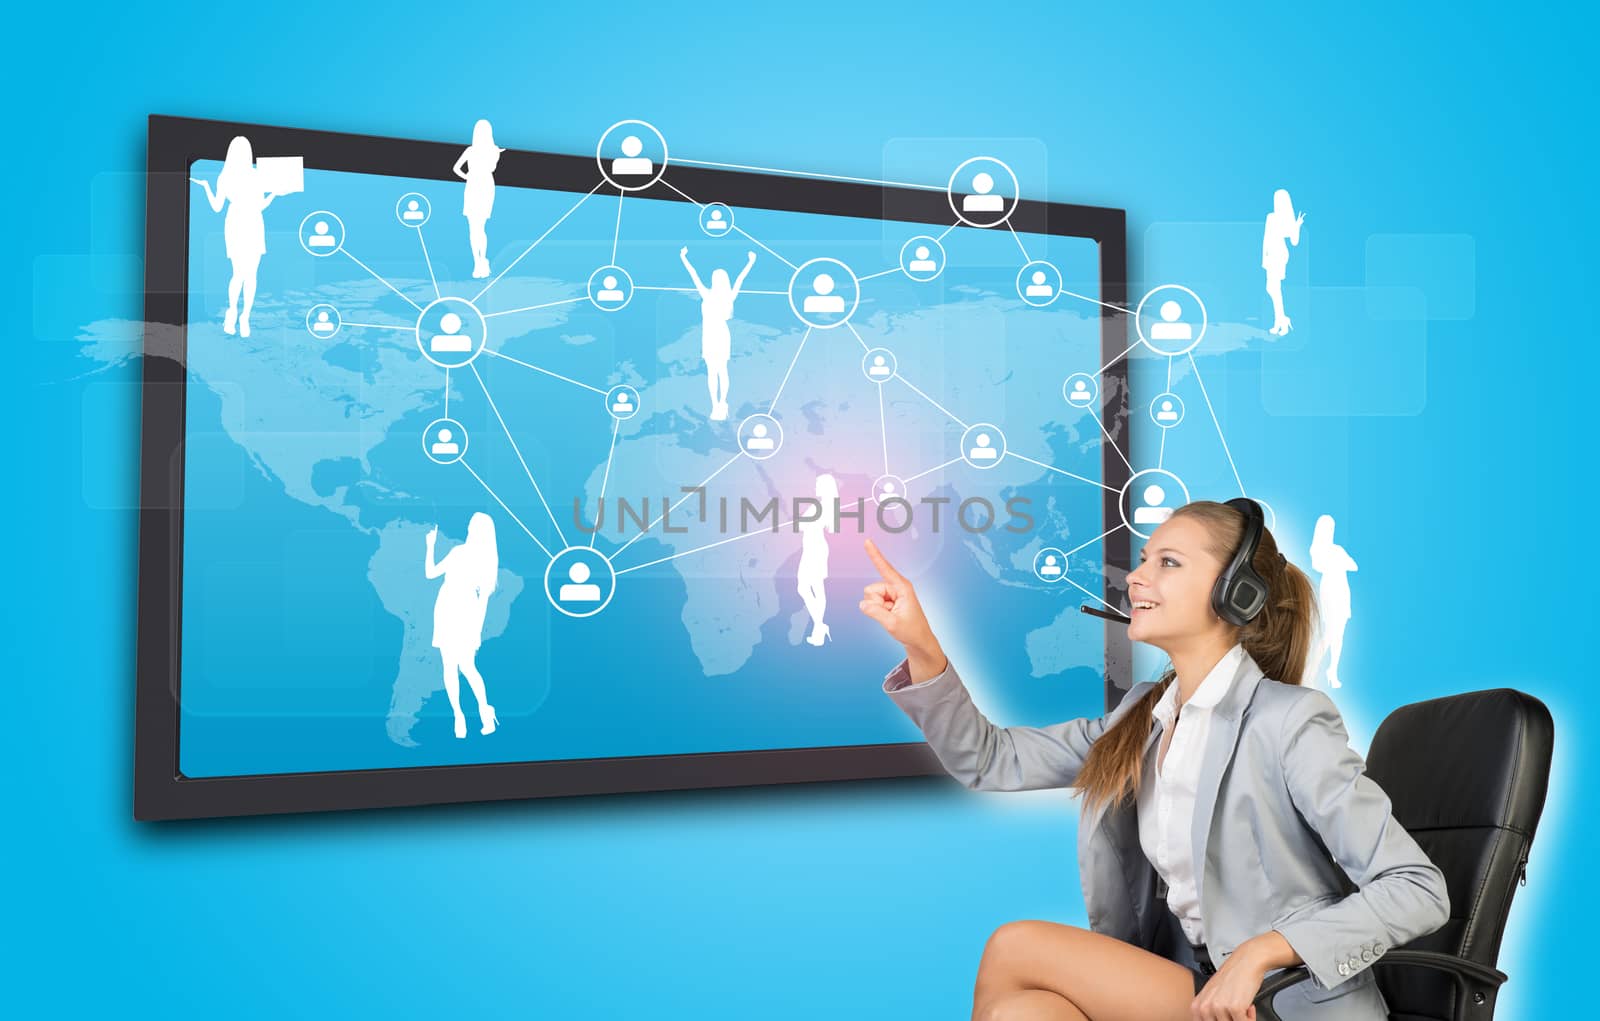 Businesswoman in headset using touch screen interface featuring world map, network of person icons and female silhouettes, on blue background